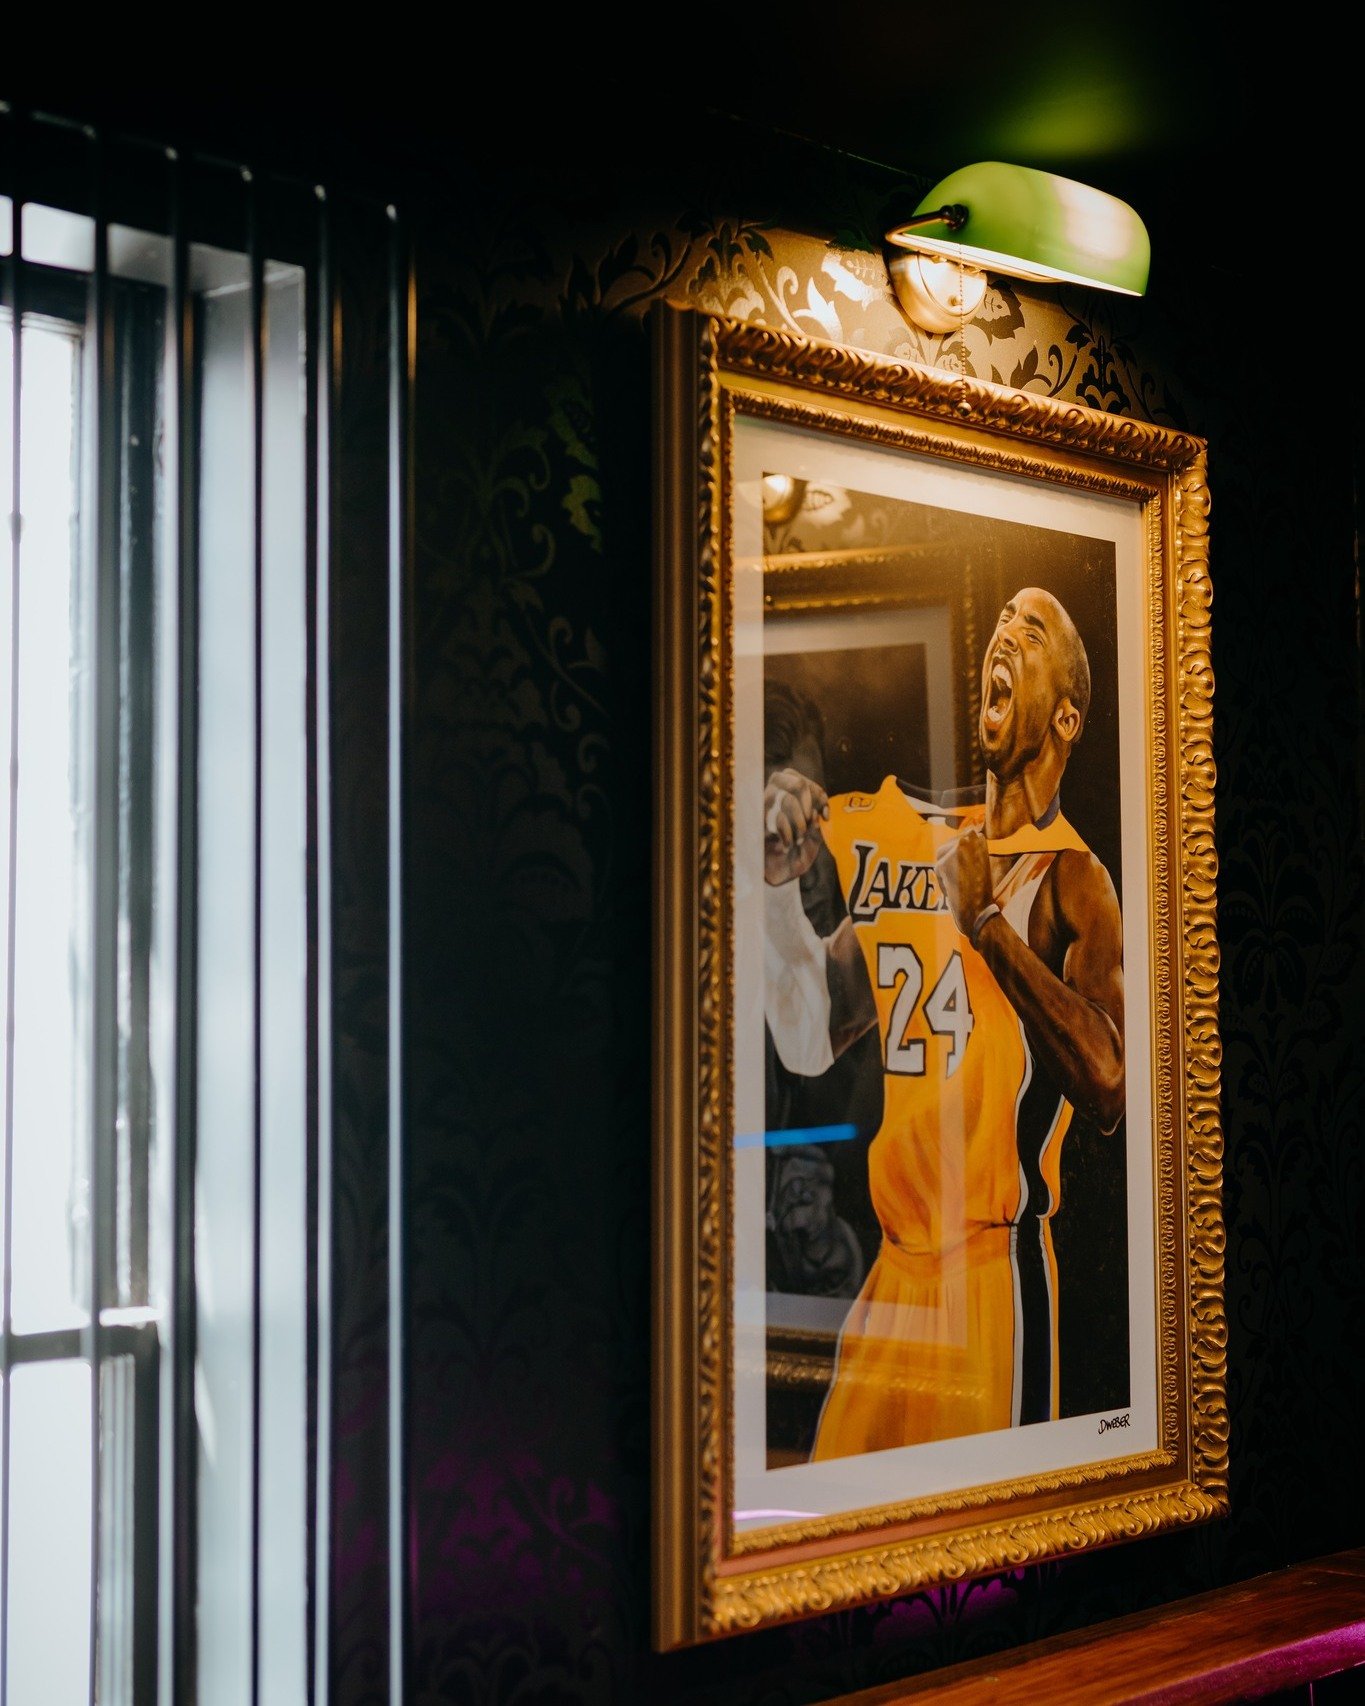 Remembering the late, great Kobe Bryant: a legend on and off the court.

Did you know?
- He was fluent in Italian, thanks to spending part of his childhood in Italy.
- Kobe won an Oscar for his animated short film &quot;Dear Basketball&quot; in 2018.